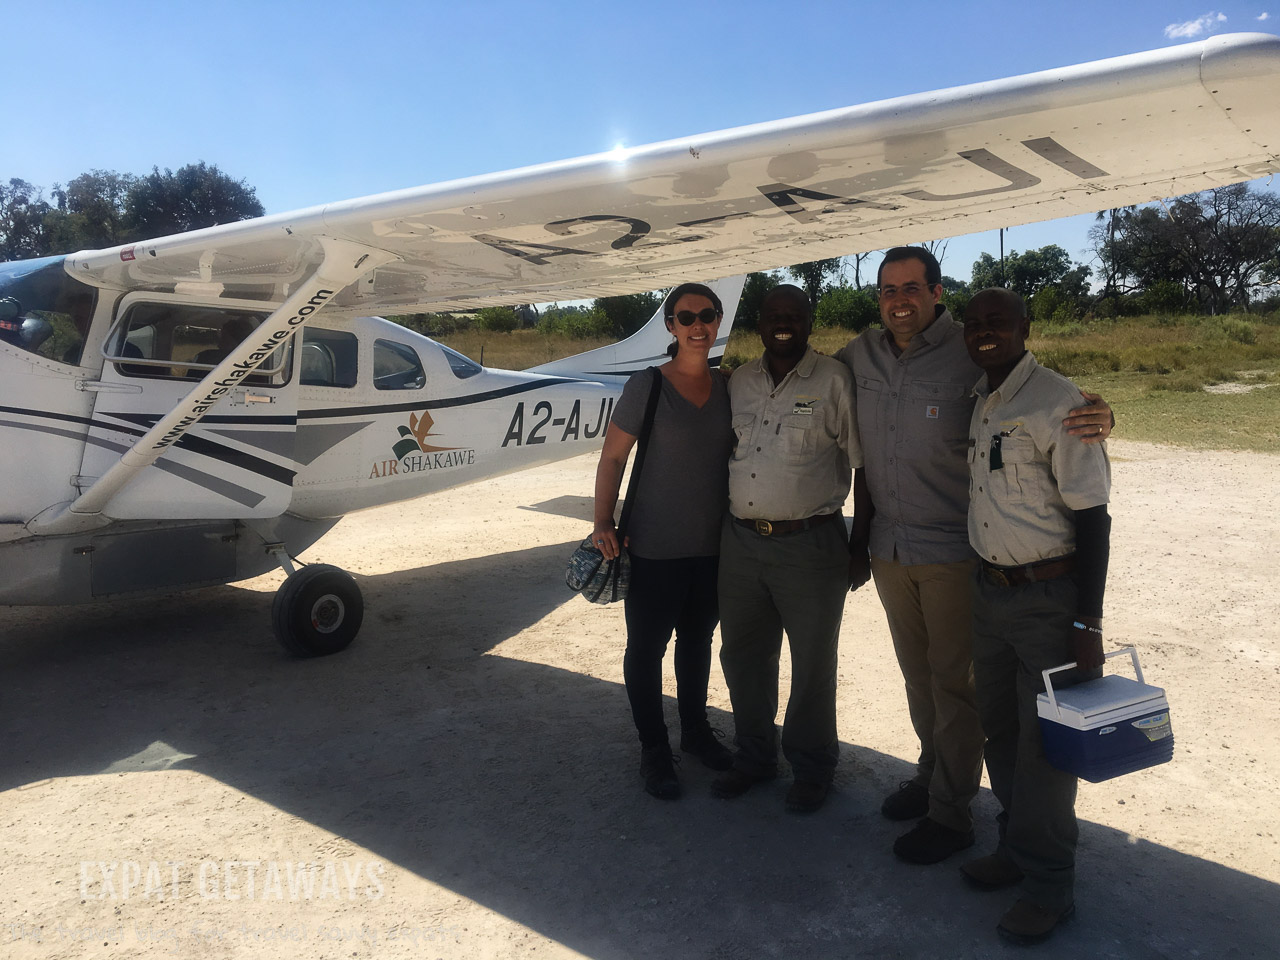 What a welcome to Gunn's Camp, Botswana! The only way in is by light aircraft and that means you kick off your stay with a scenic flight over the Okavango Delta. Expat Getaways 2 Weeks in Southern Africa. 